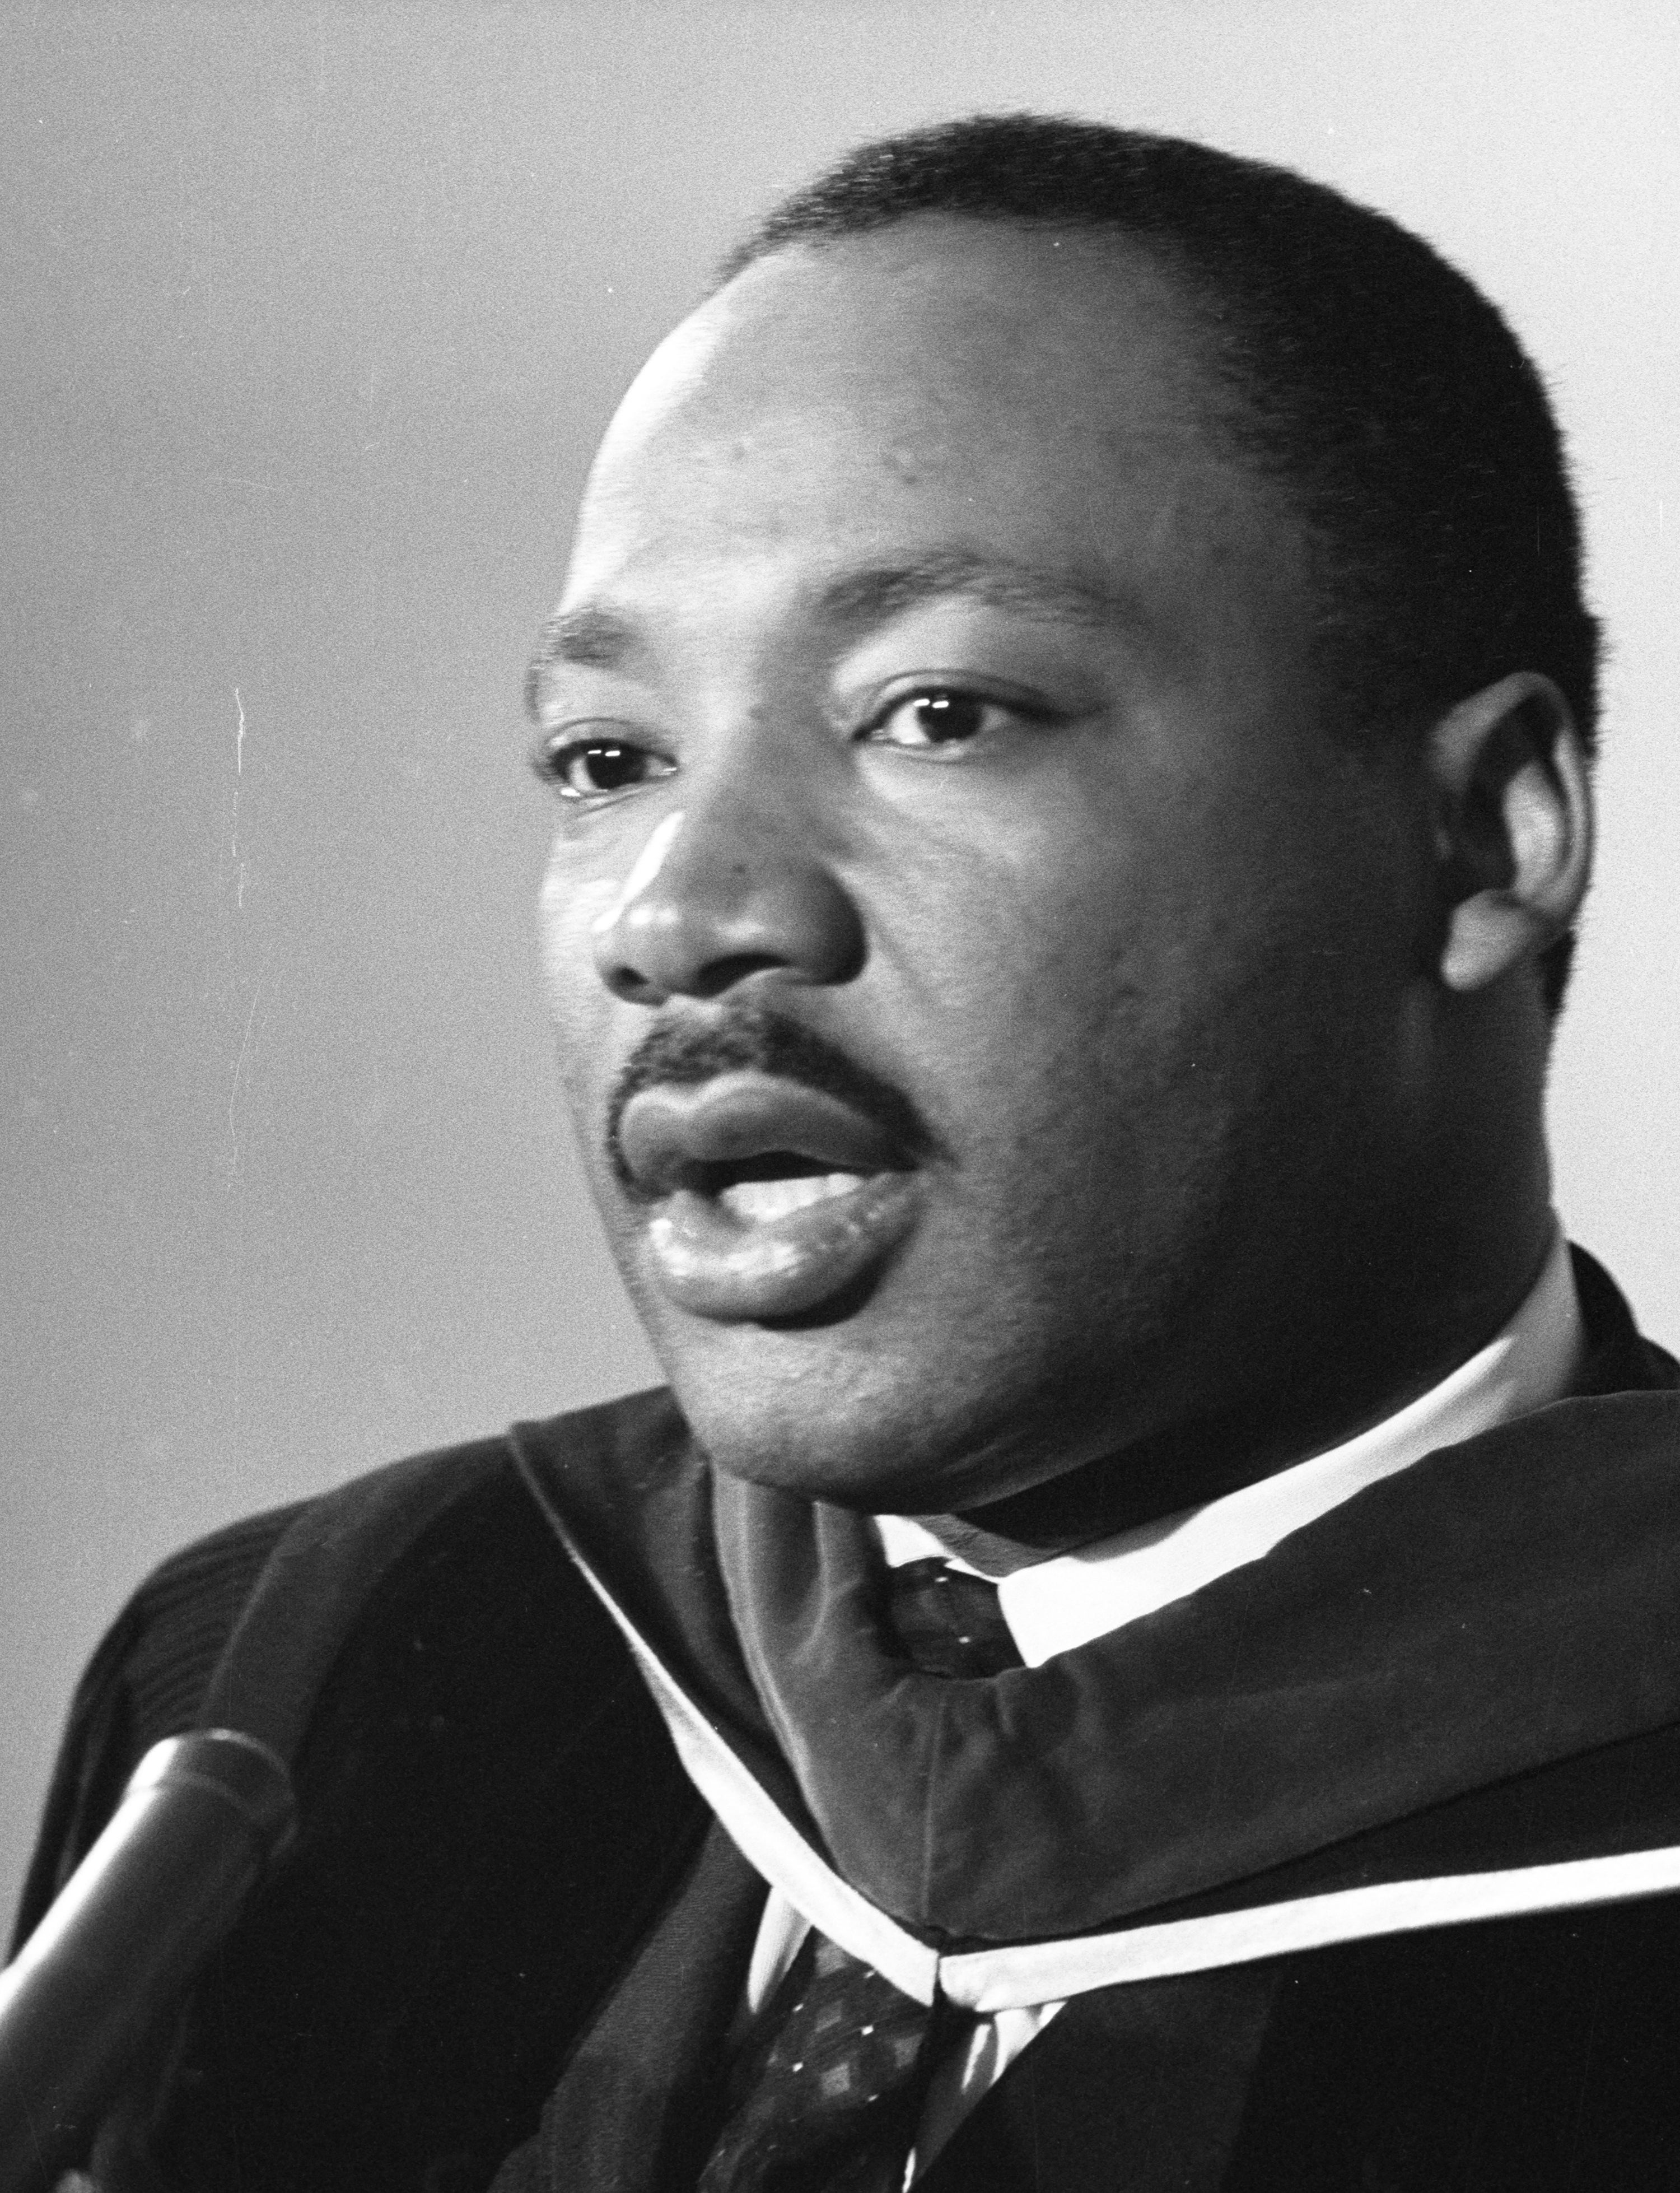 Martin Luther King Jr. talks during a 1965 press conference